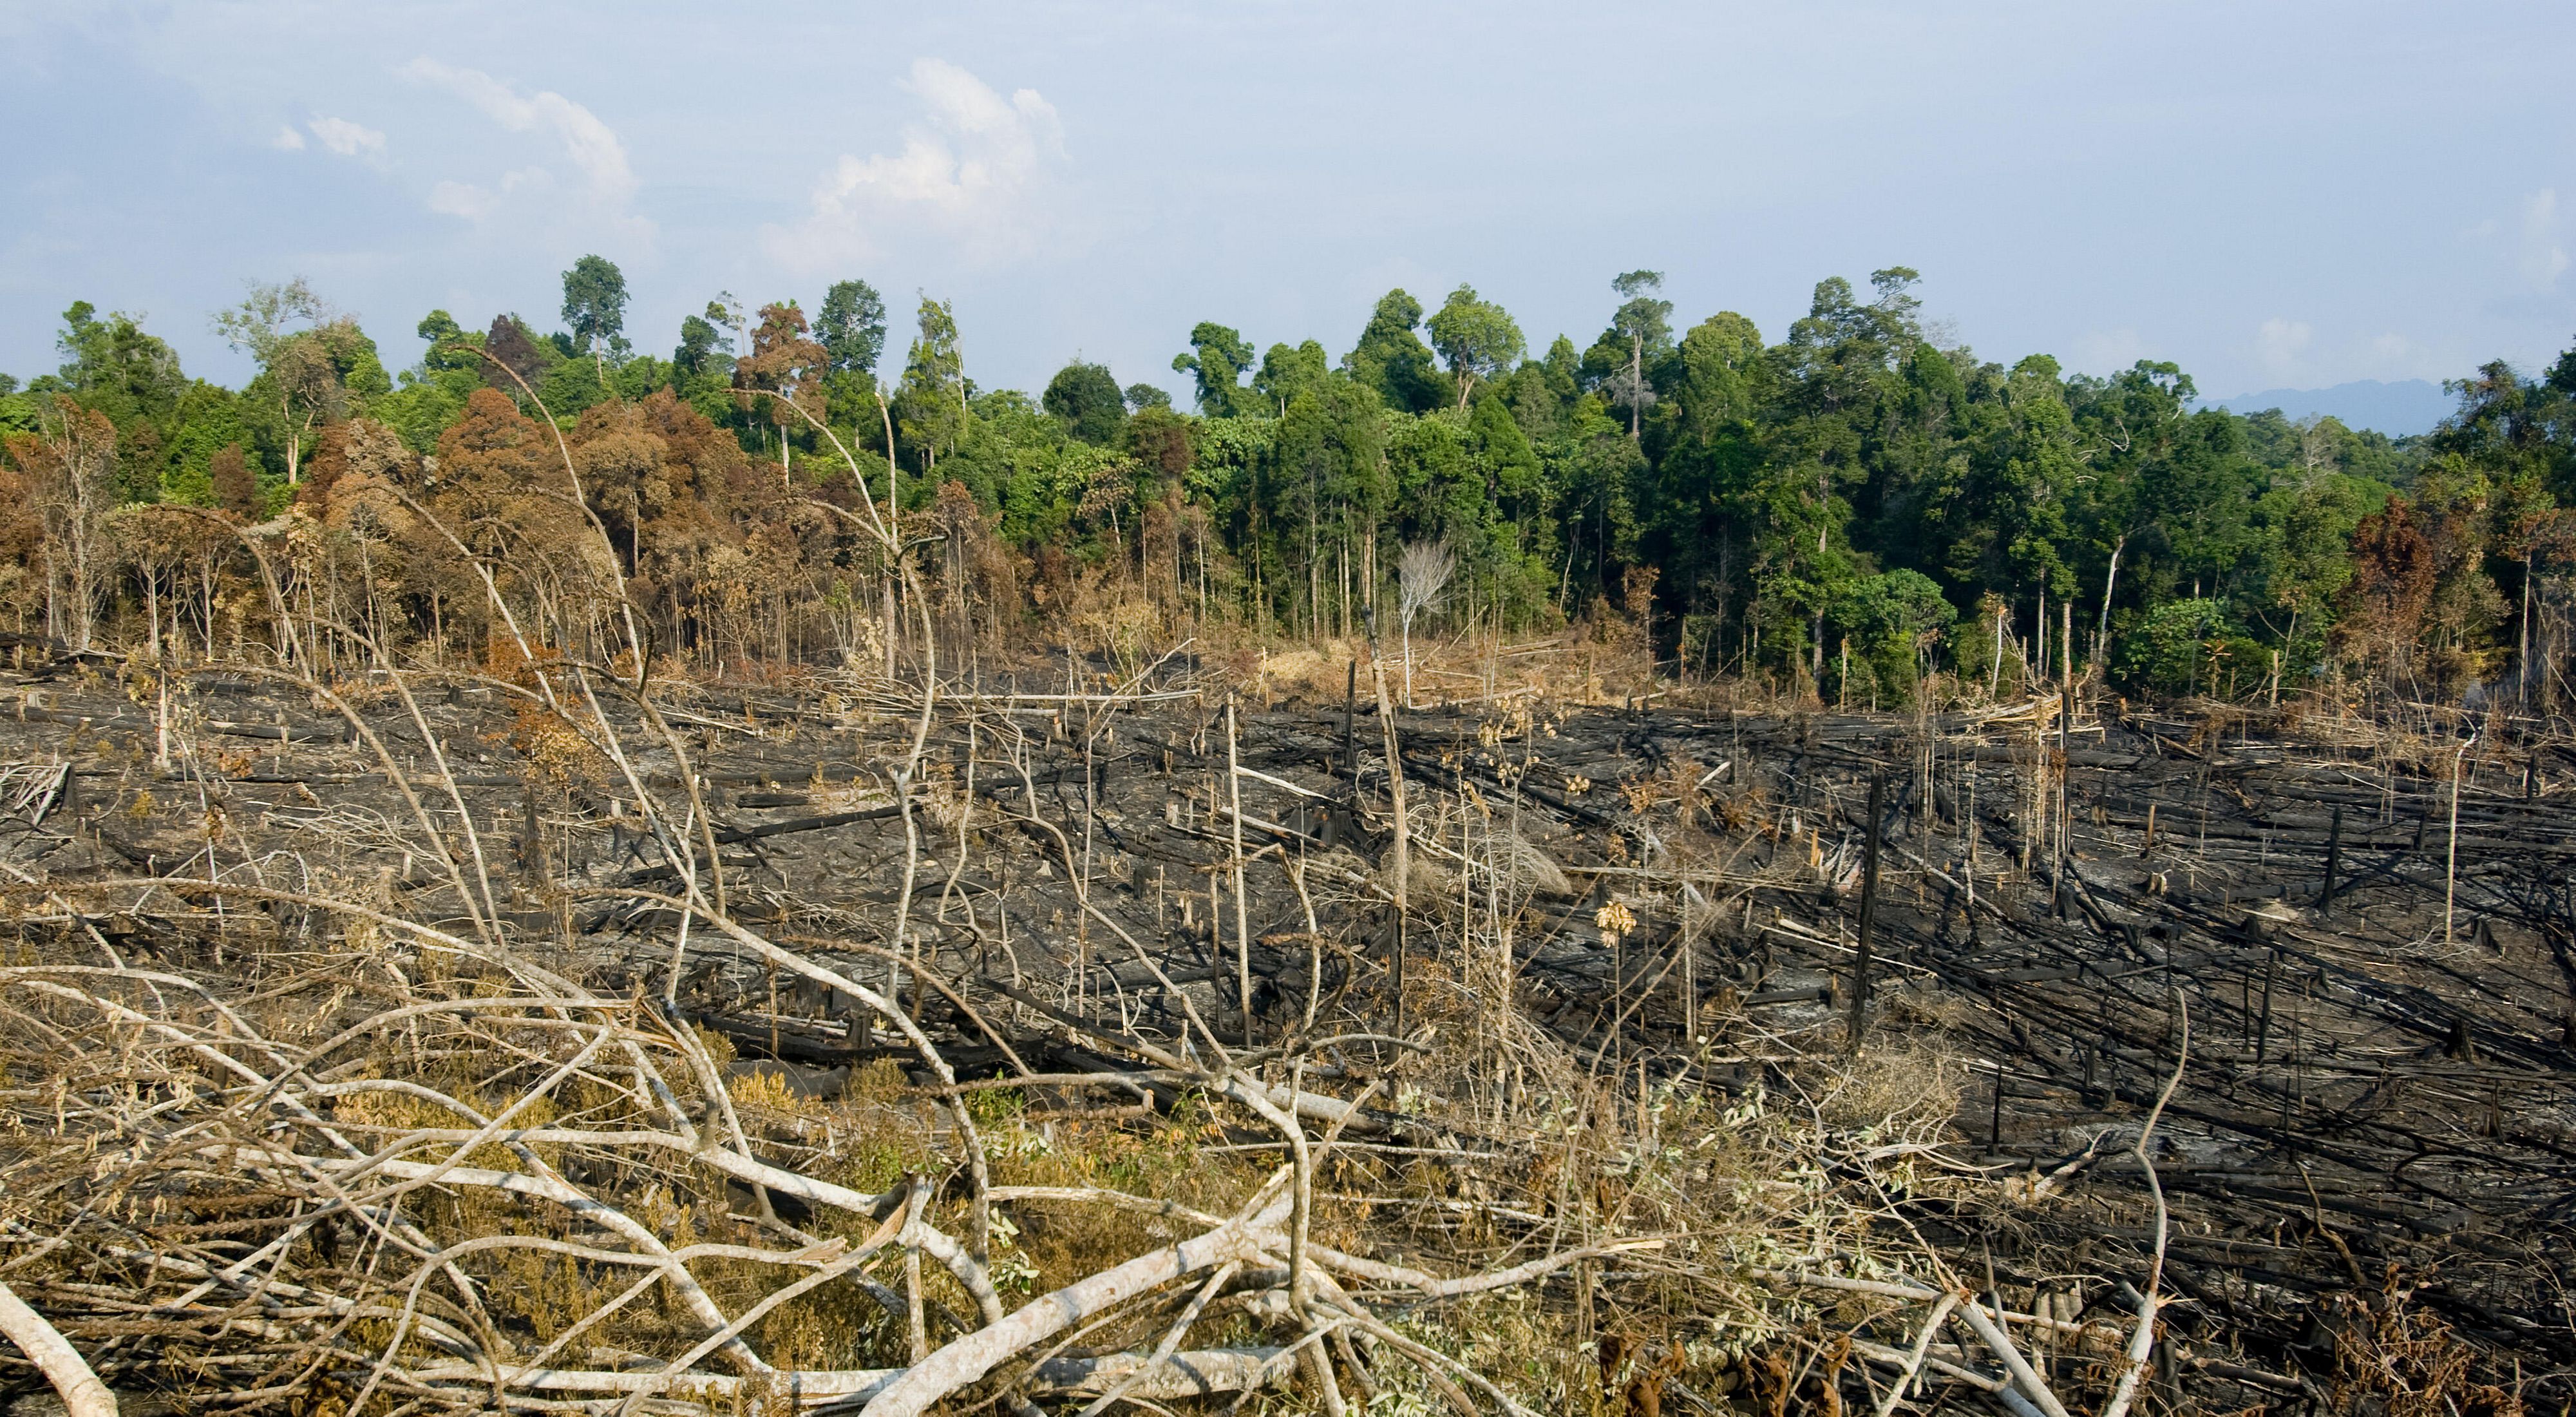 Tropical forest areas that have been deforested through a process of slash and burn to open areas for agriculture and subsitance farming in the Kalimantan region of Borneo, Indonesia.